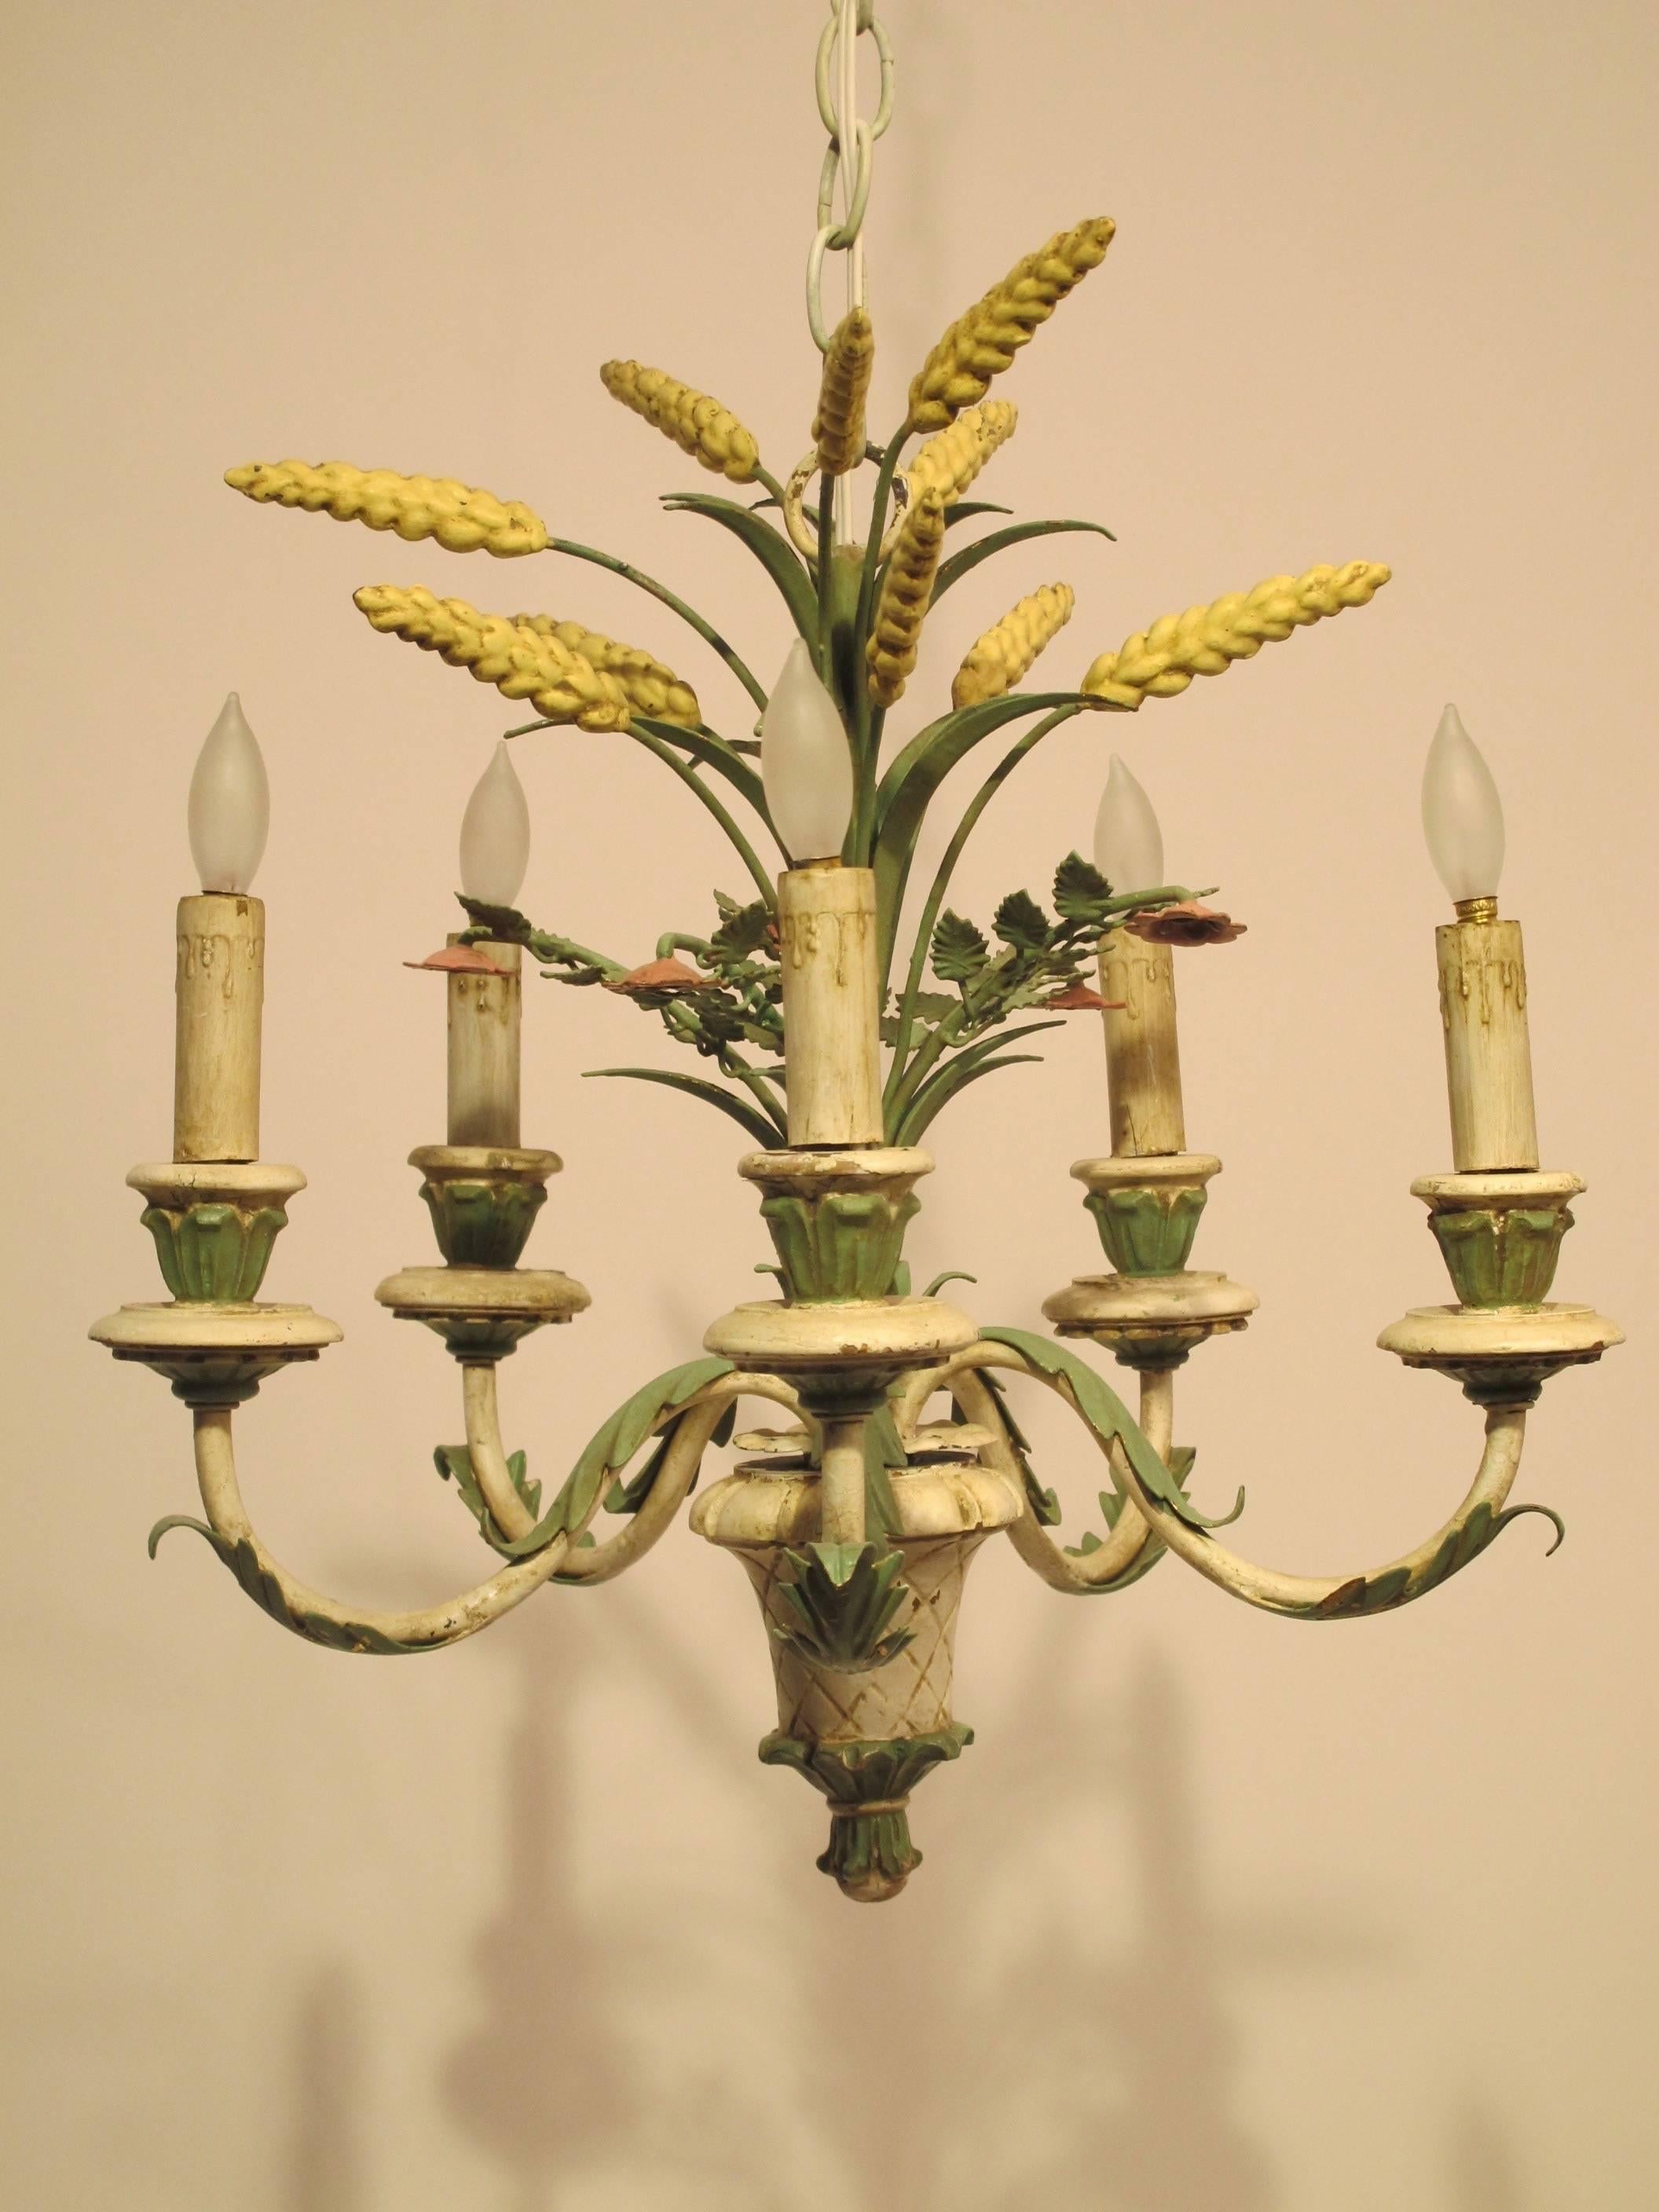 Carved wood with green and white old paint, six arm light fixture with wheat detail. Newly re-wired, holds chandelier size light bulbs. Italian, circa 1950.